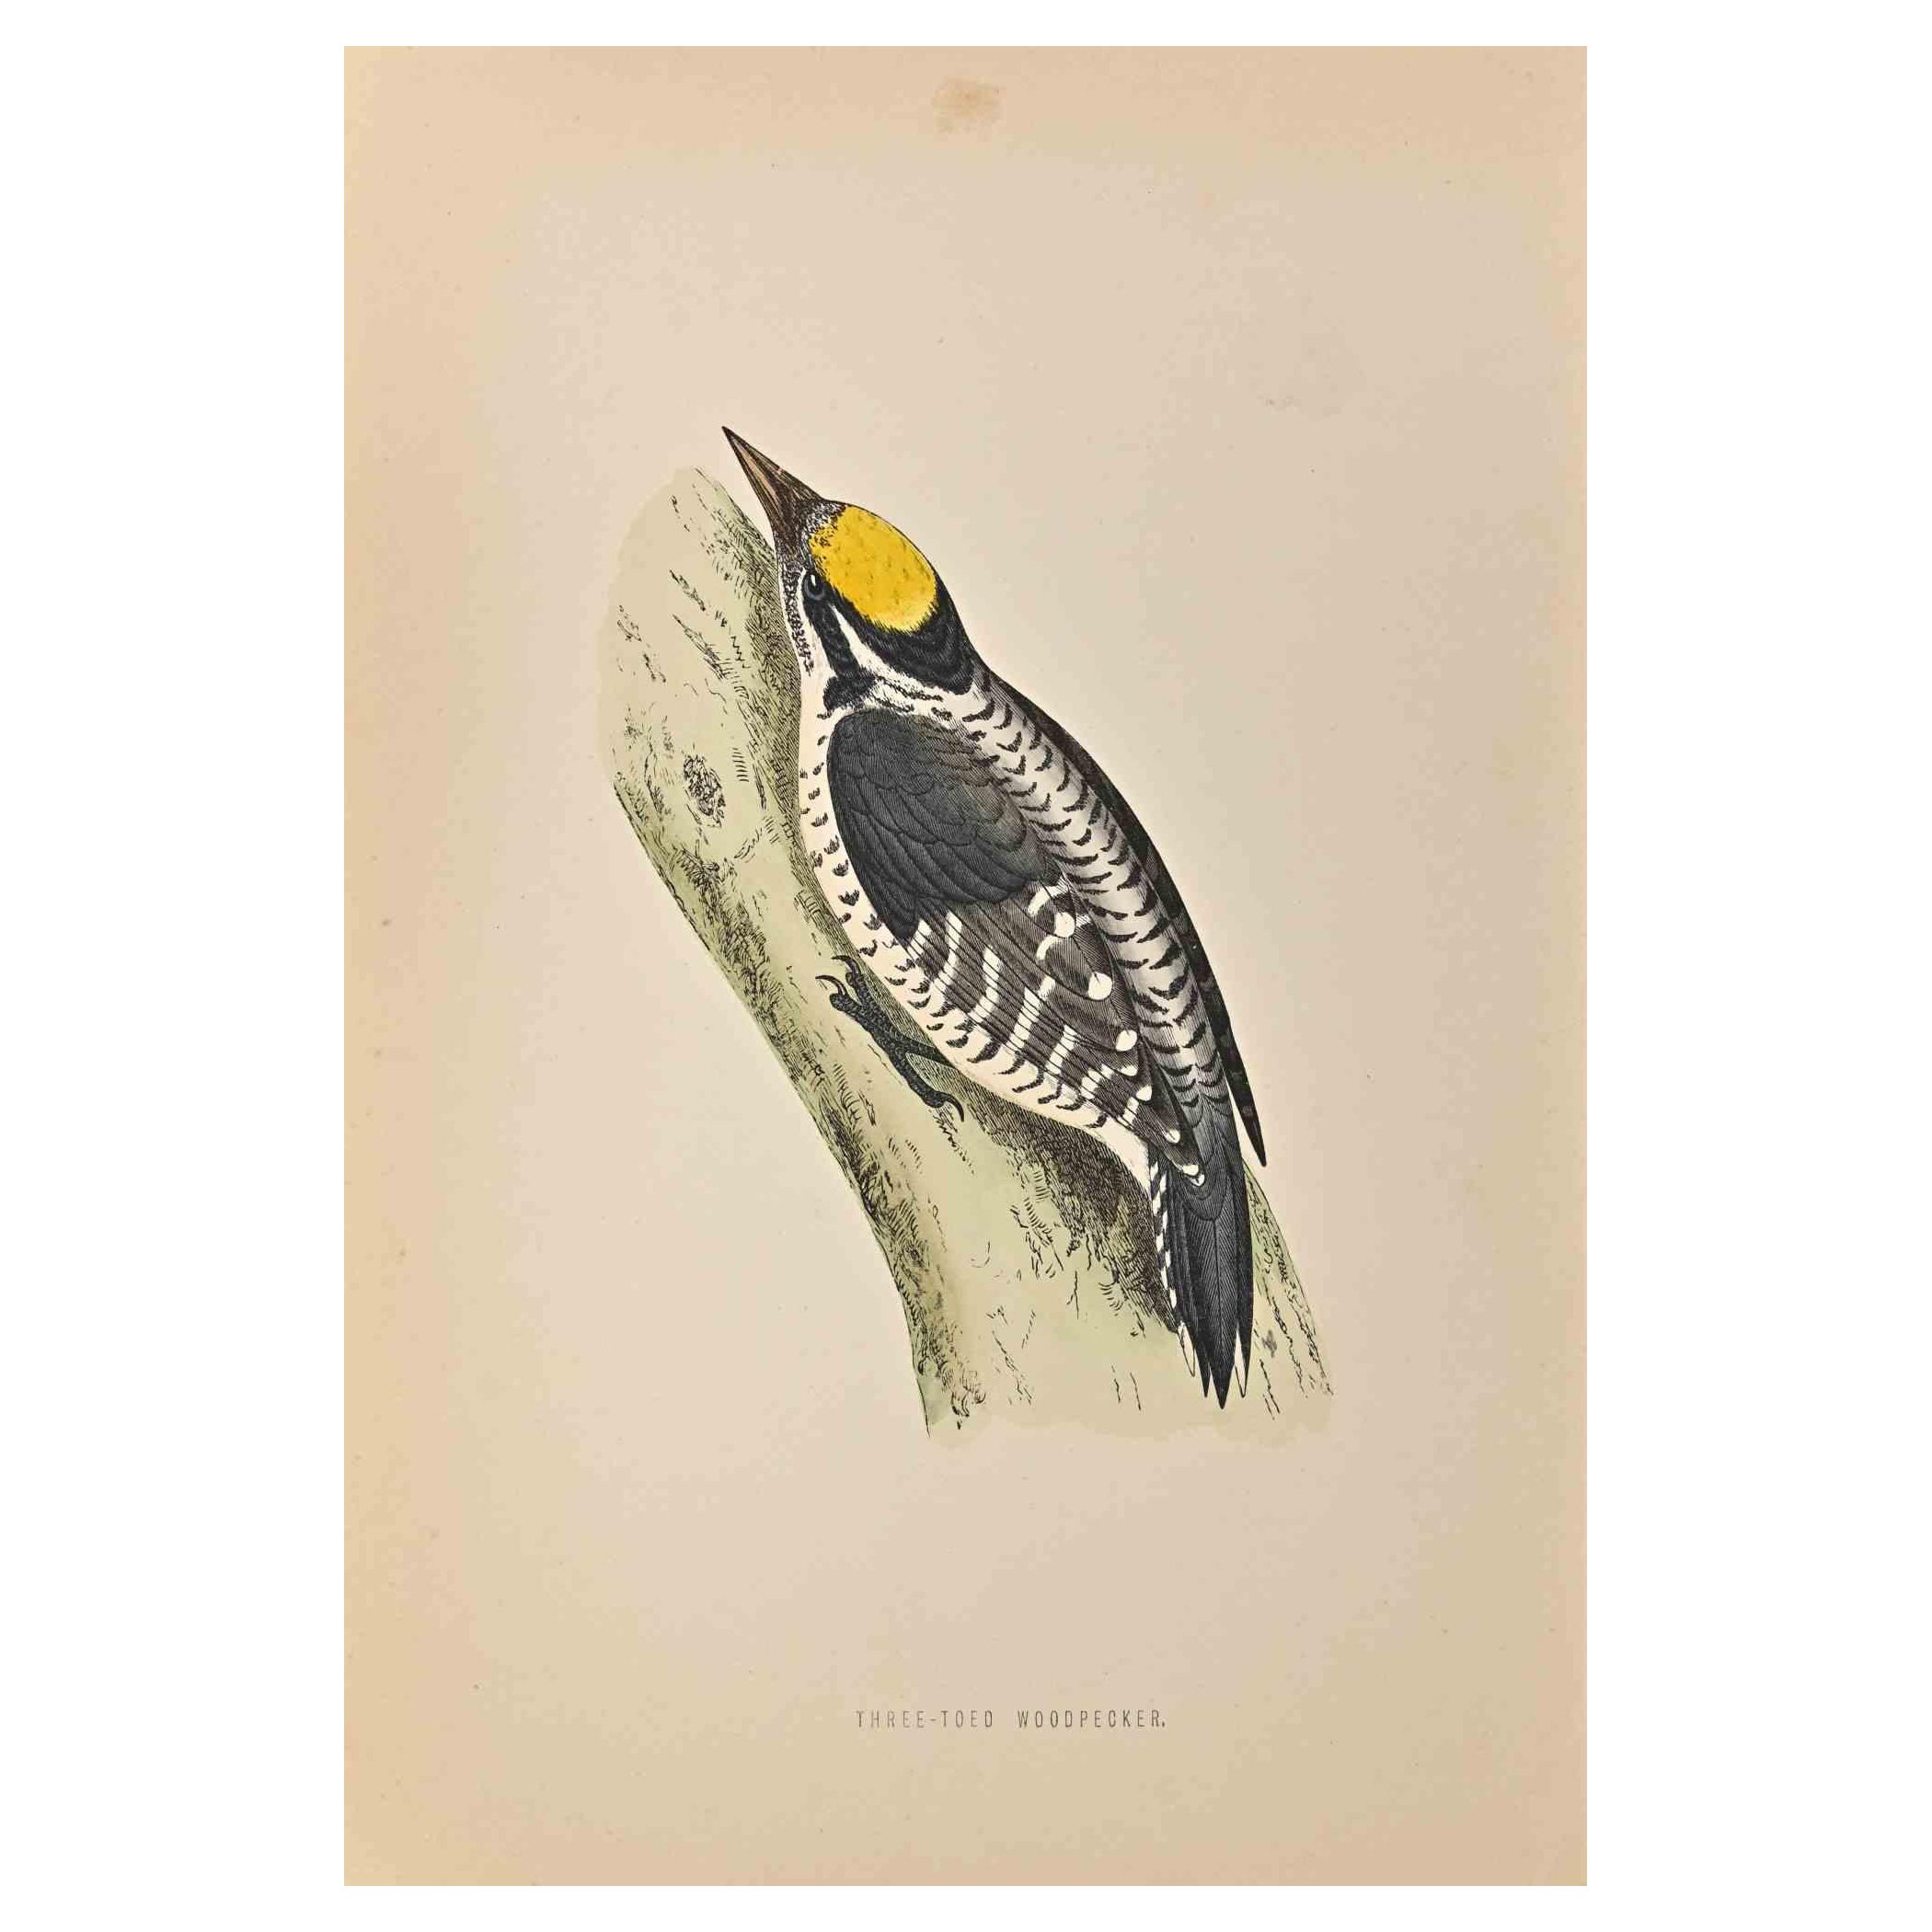 Three-Toed Woodpecker is a modern artwork realized in 1870 by the British artist Alexander Francis Lydon (1836-1917) . 

Woodcut print, hand colored, published by London, Bell & Sons, 1870.  Name of the bird printed in plate. This work is part of a